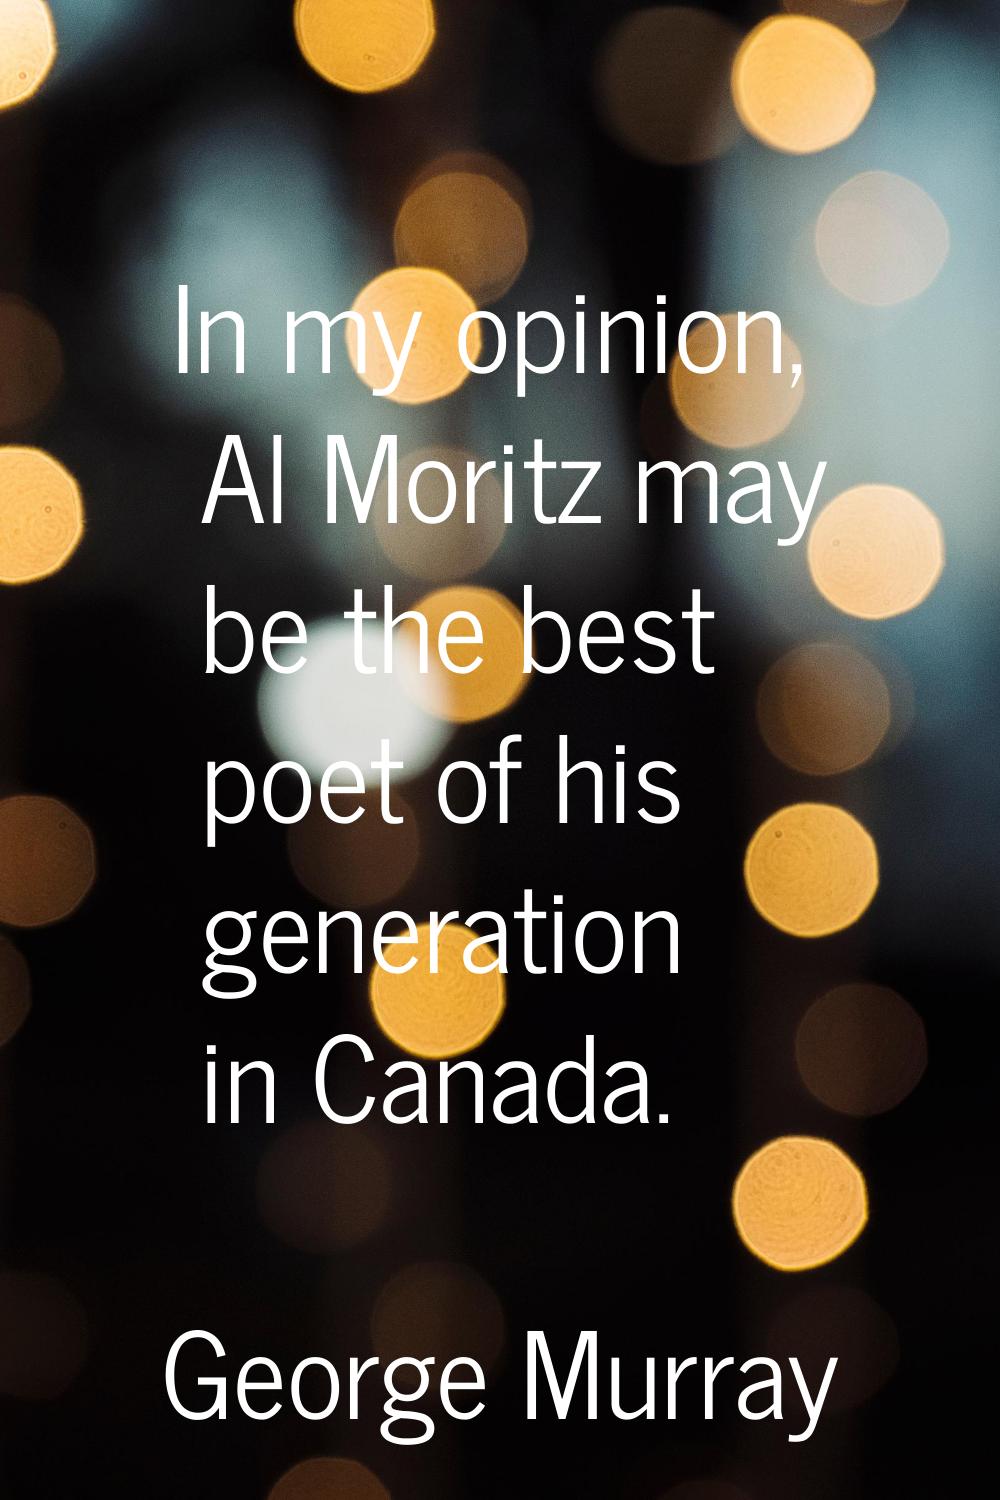 In my opinion, Al Moritz may be the best poet of his generation in Canada.